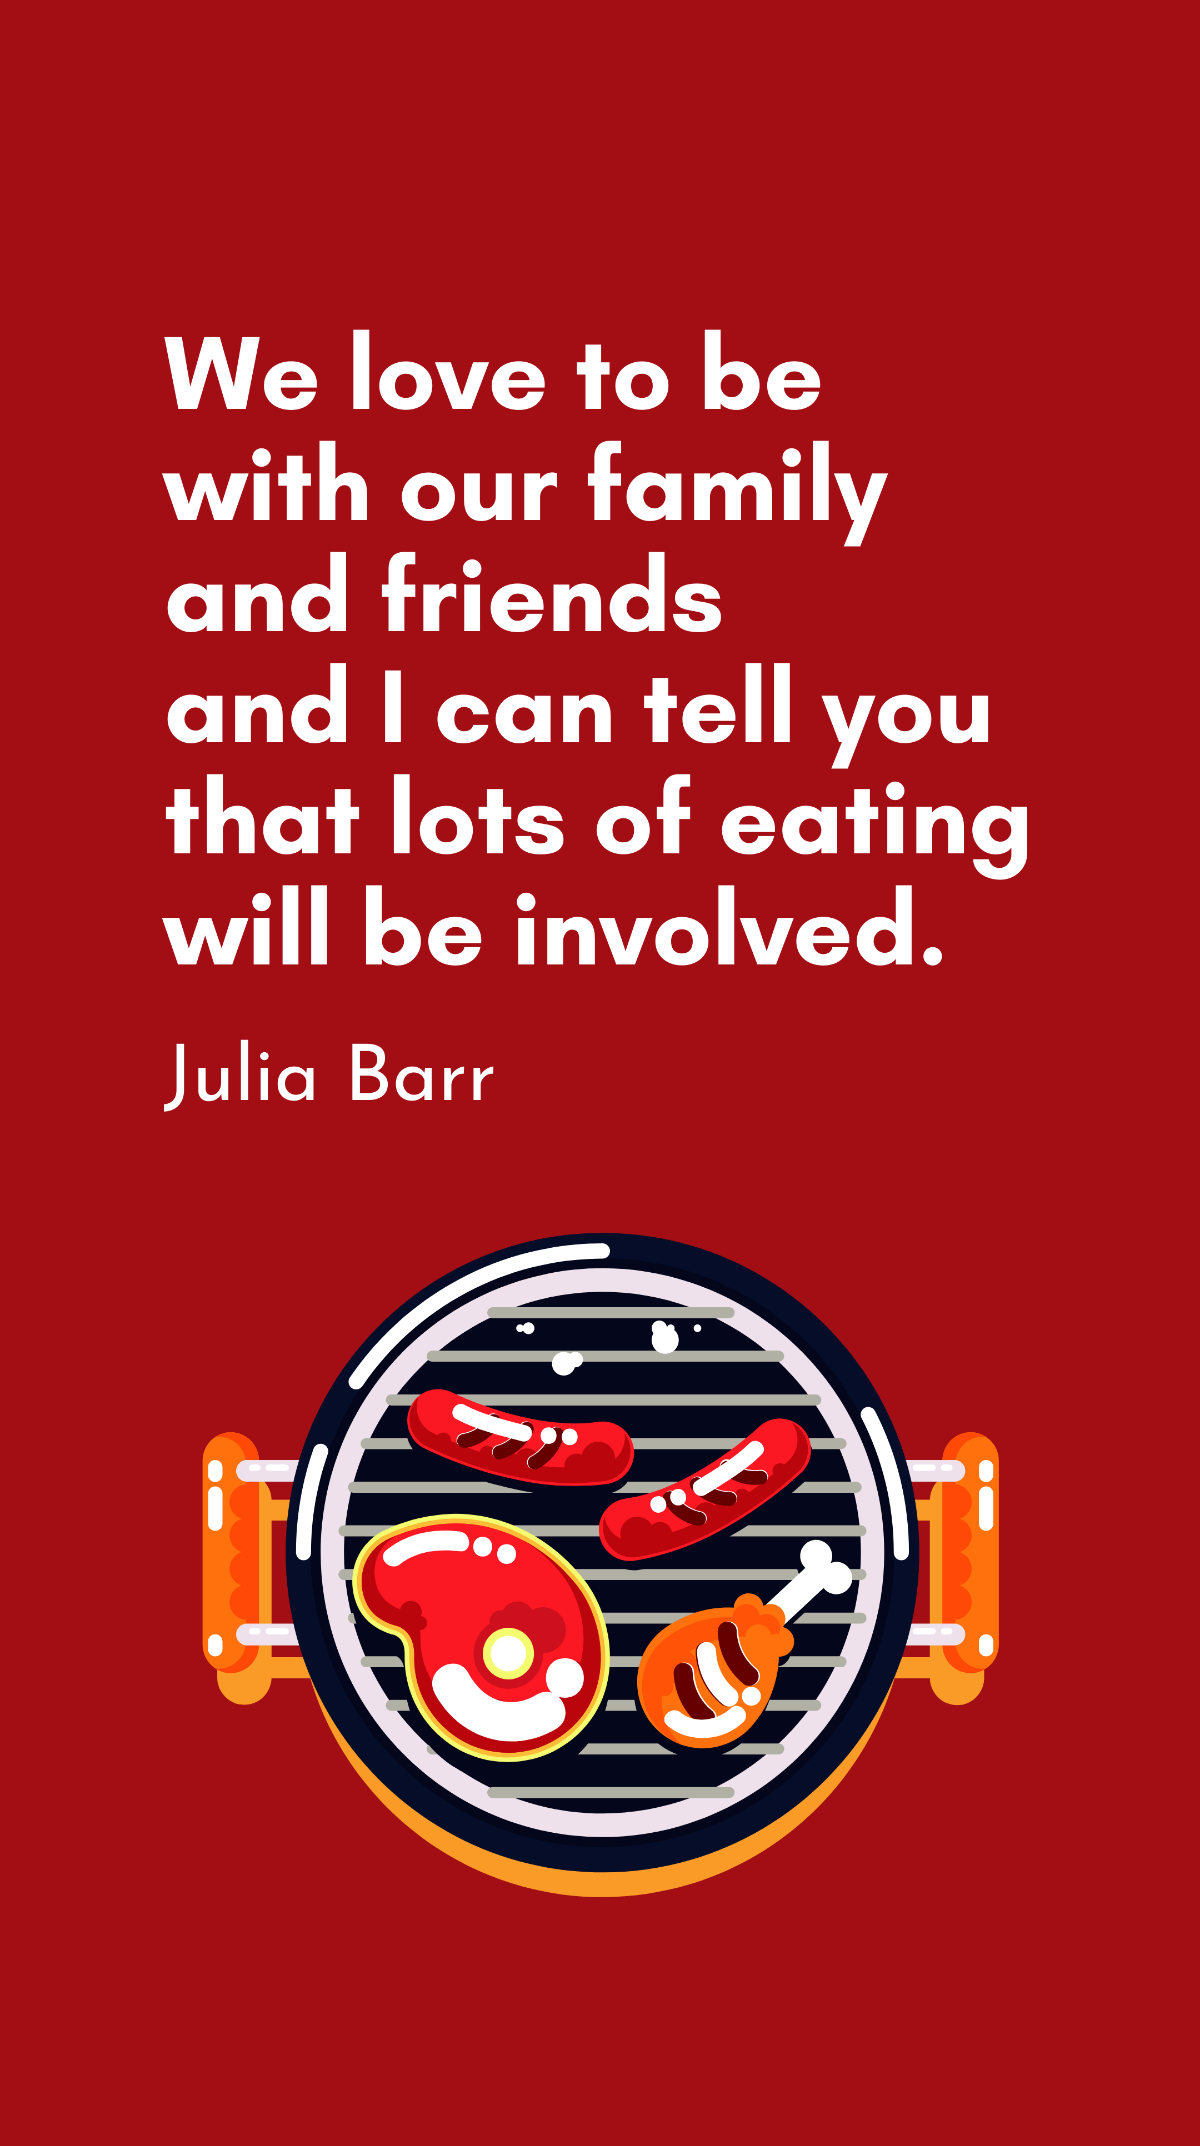 Julia Barr - We love to be with our family and friends and I can tell you that lots of eating will be involved.